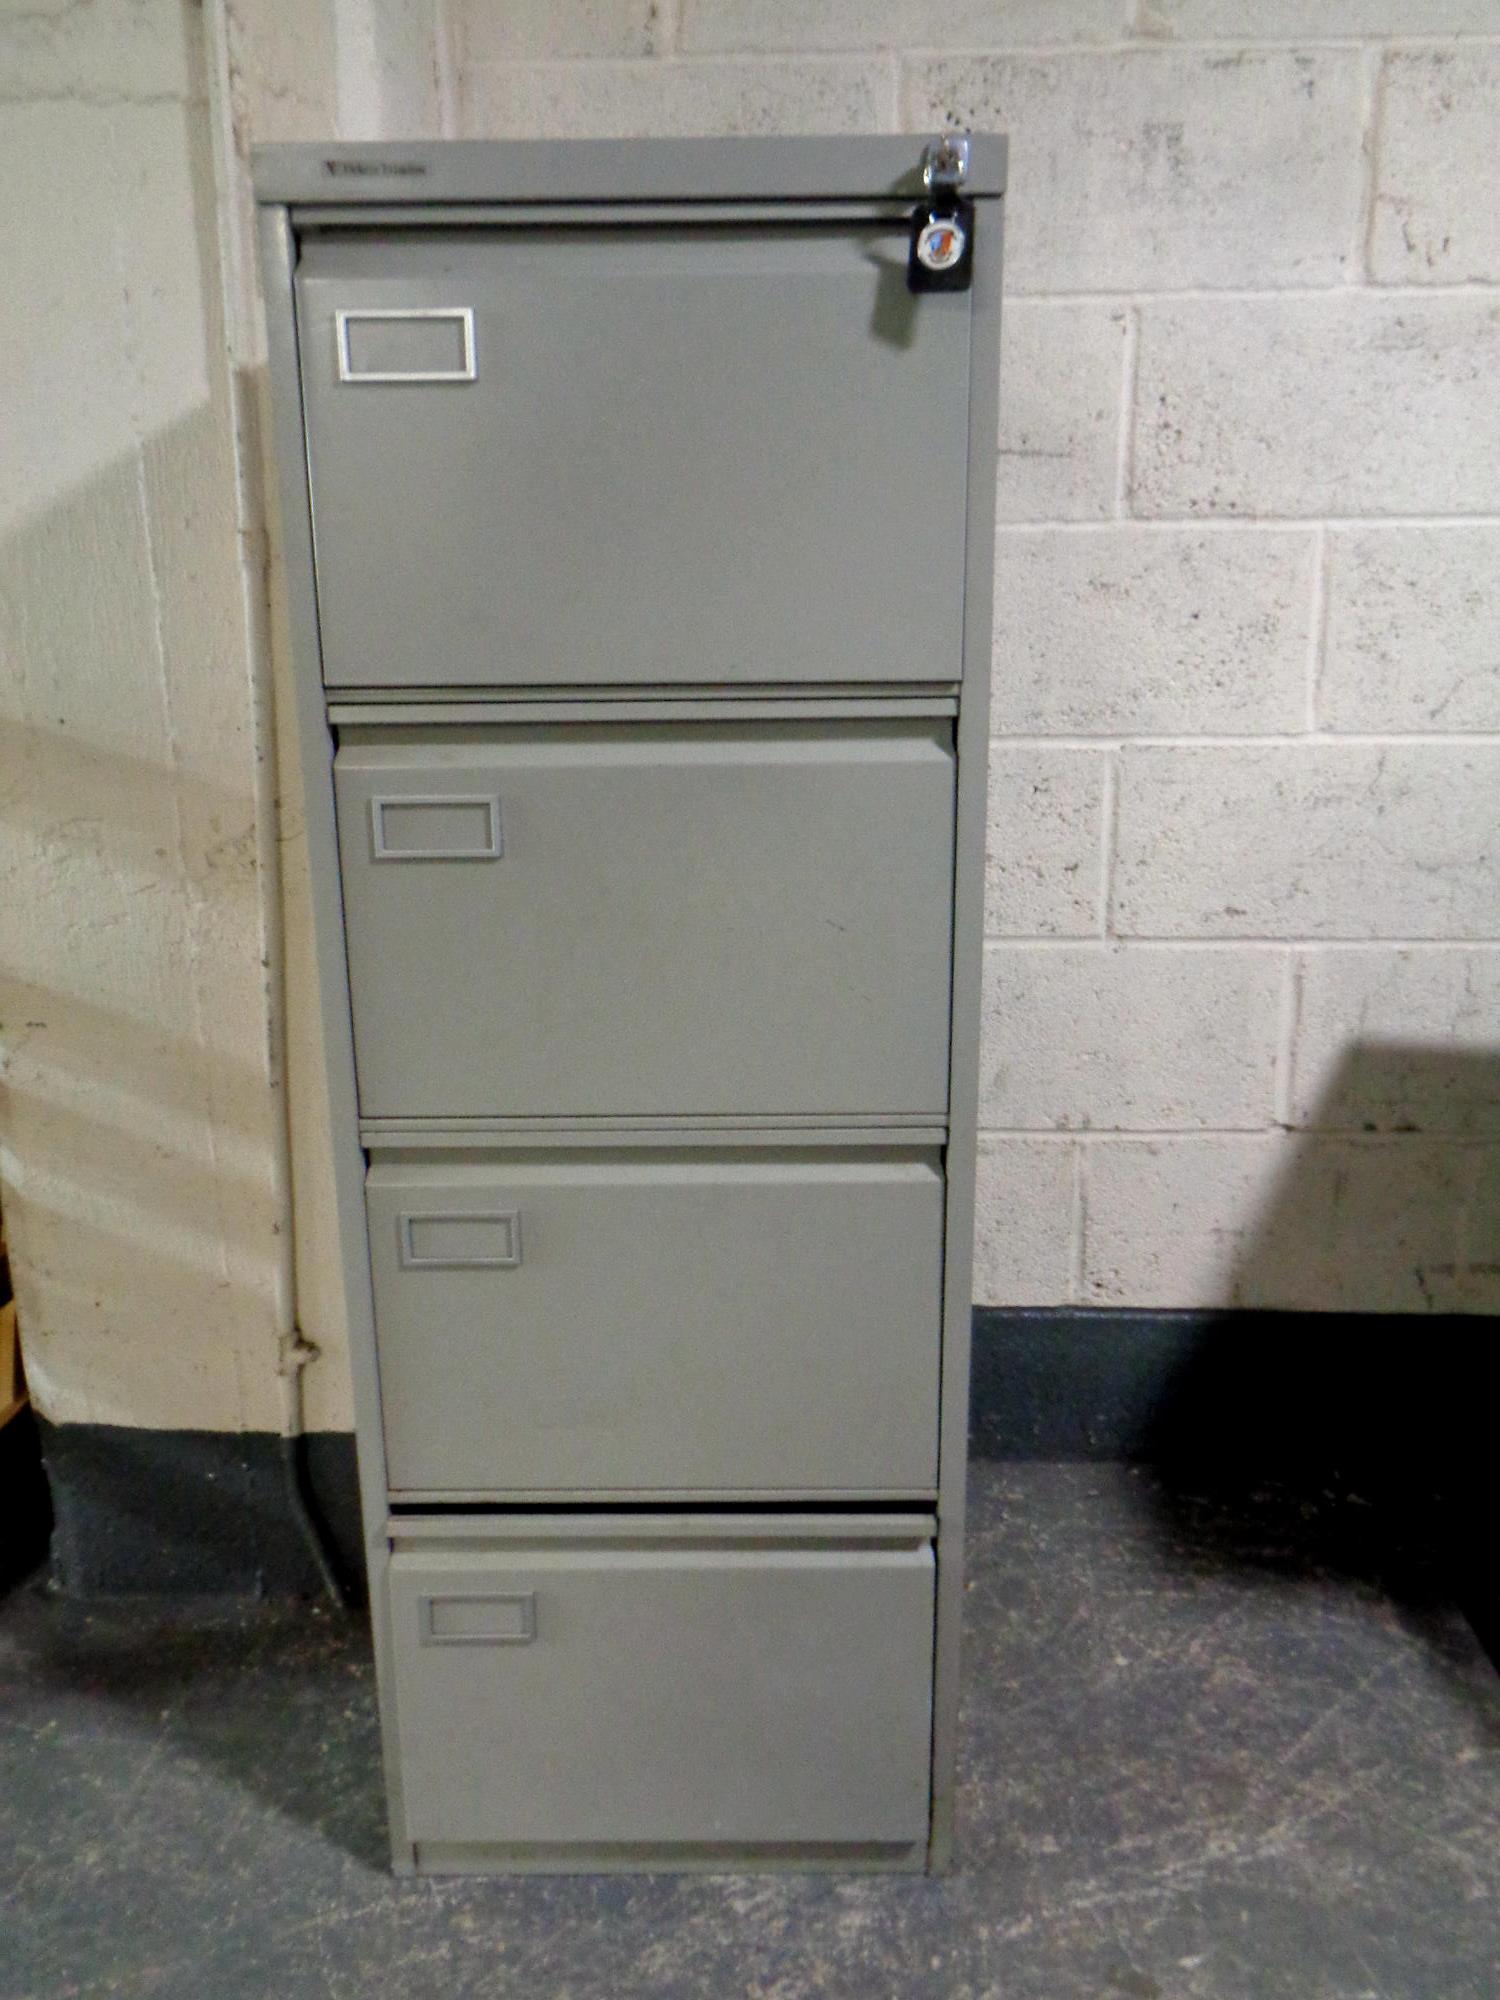 A metal four drawer filing cabinet by Vickers with key